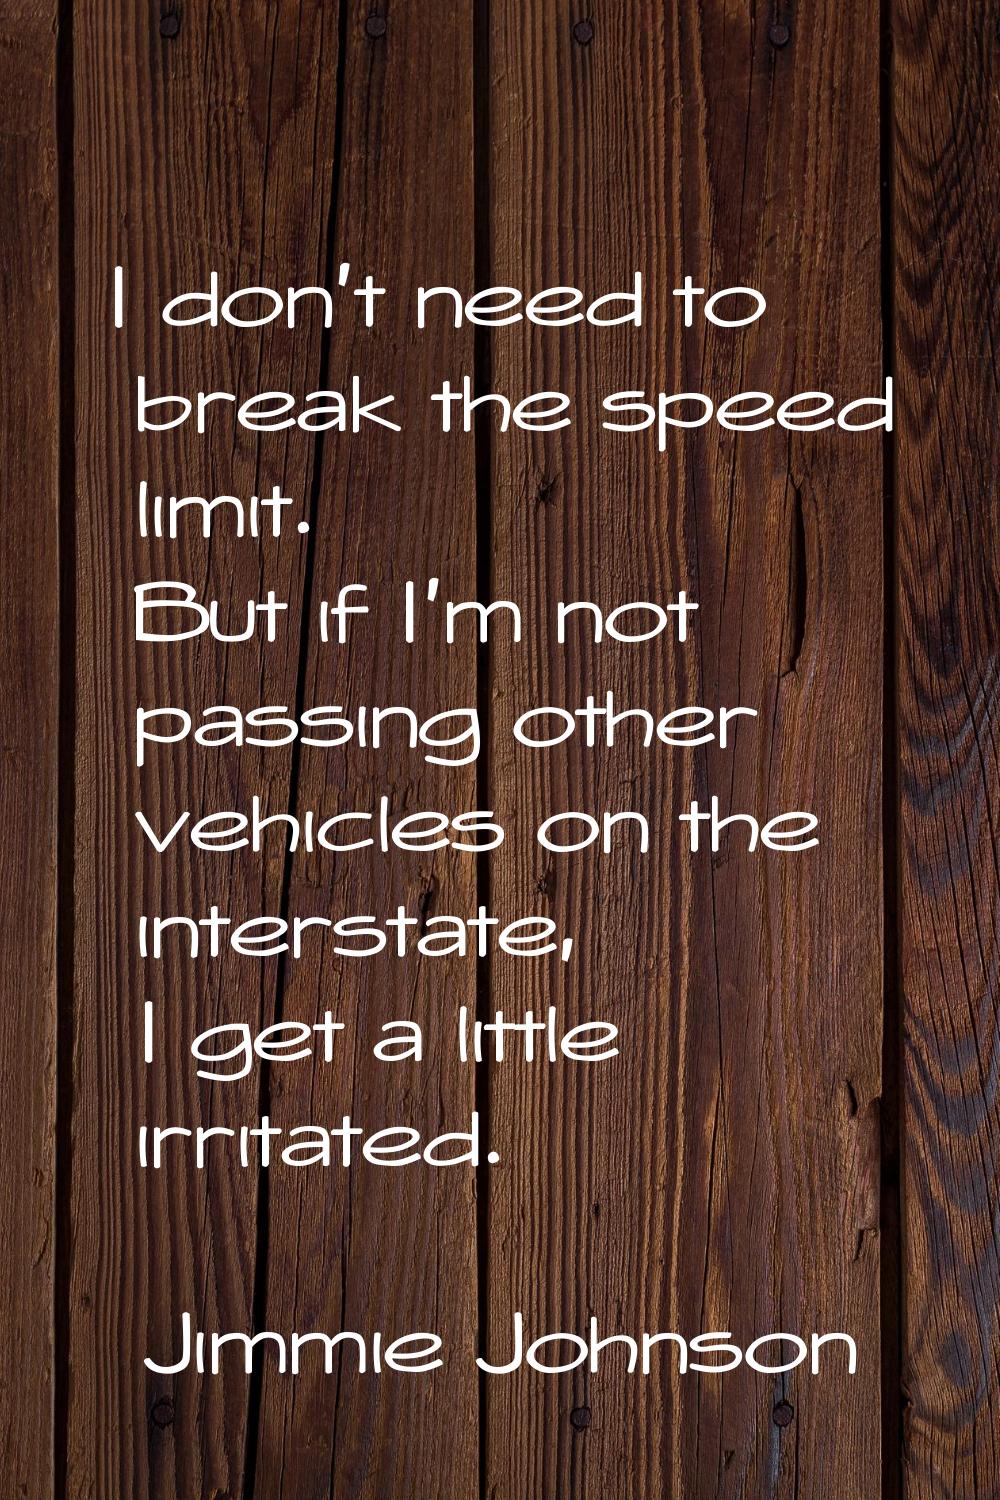 I don't need to break the speed limit. But if I'm not passing other vehicles on the interstate, I g